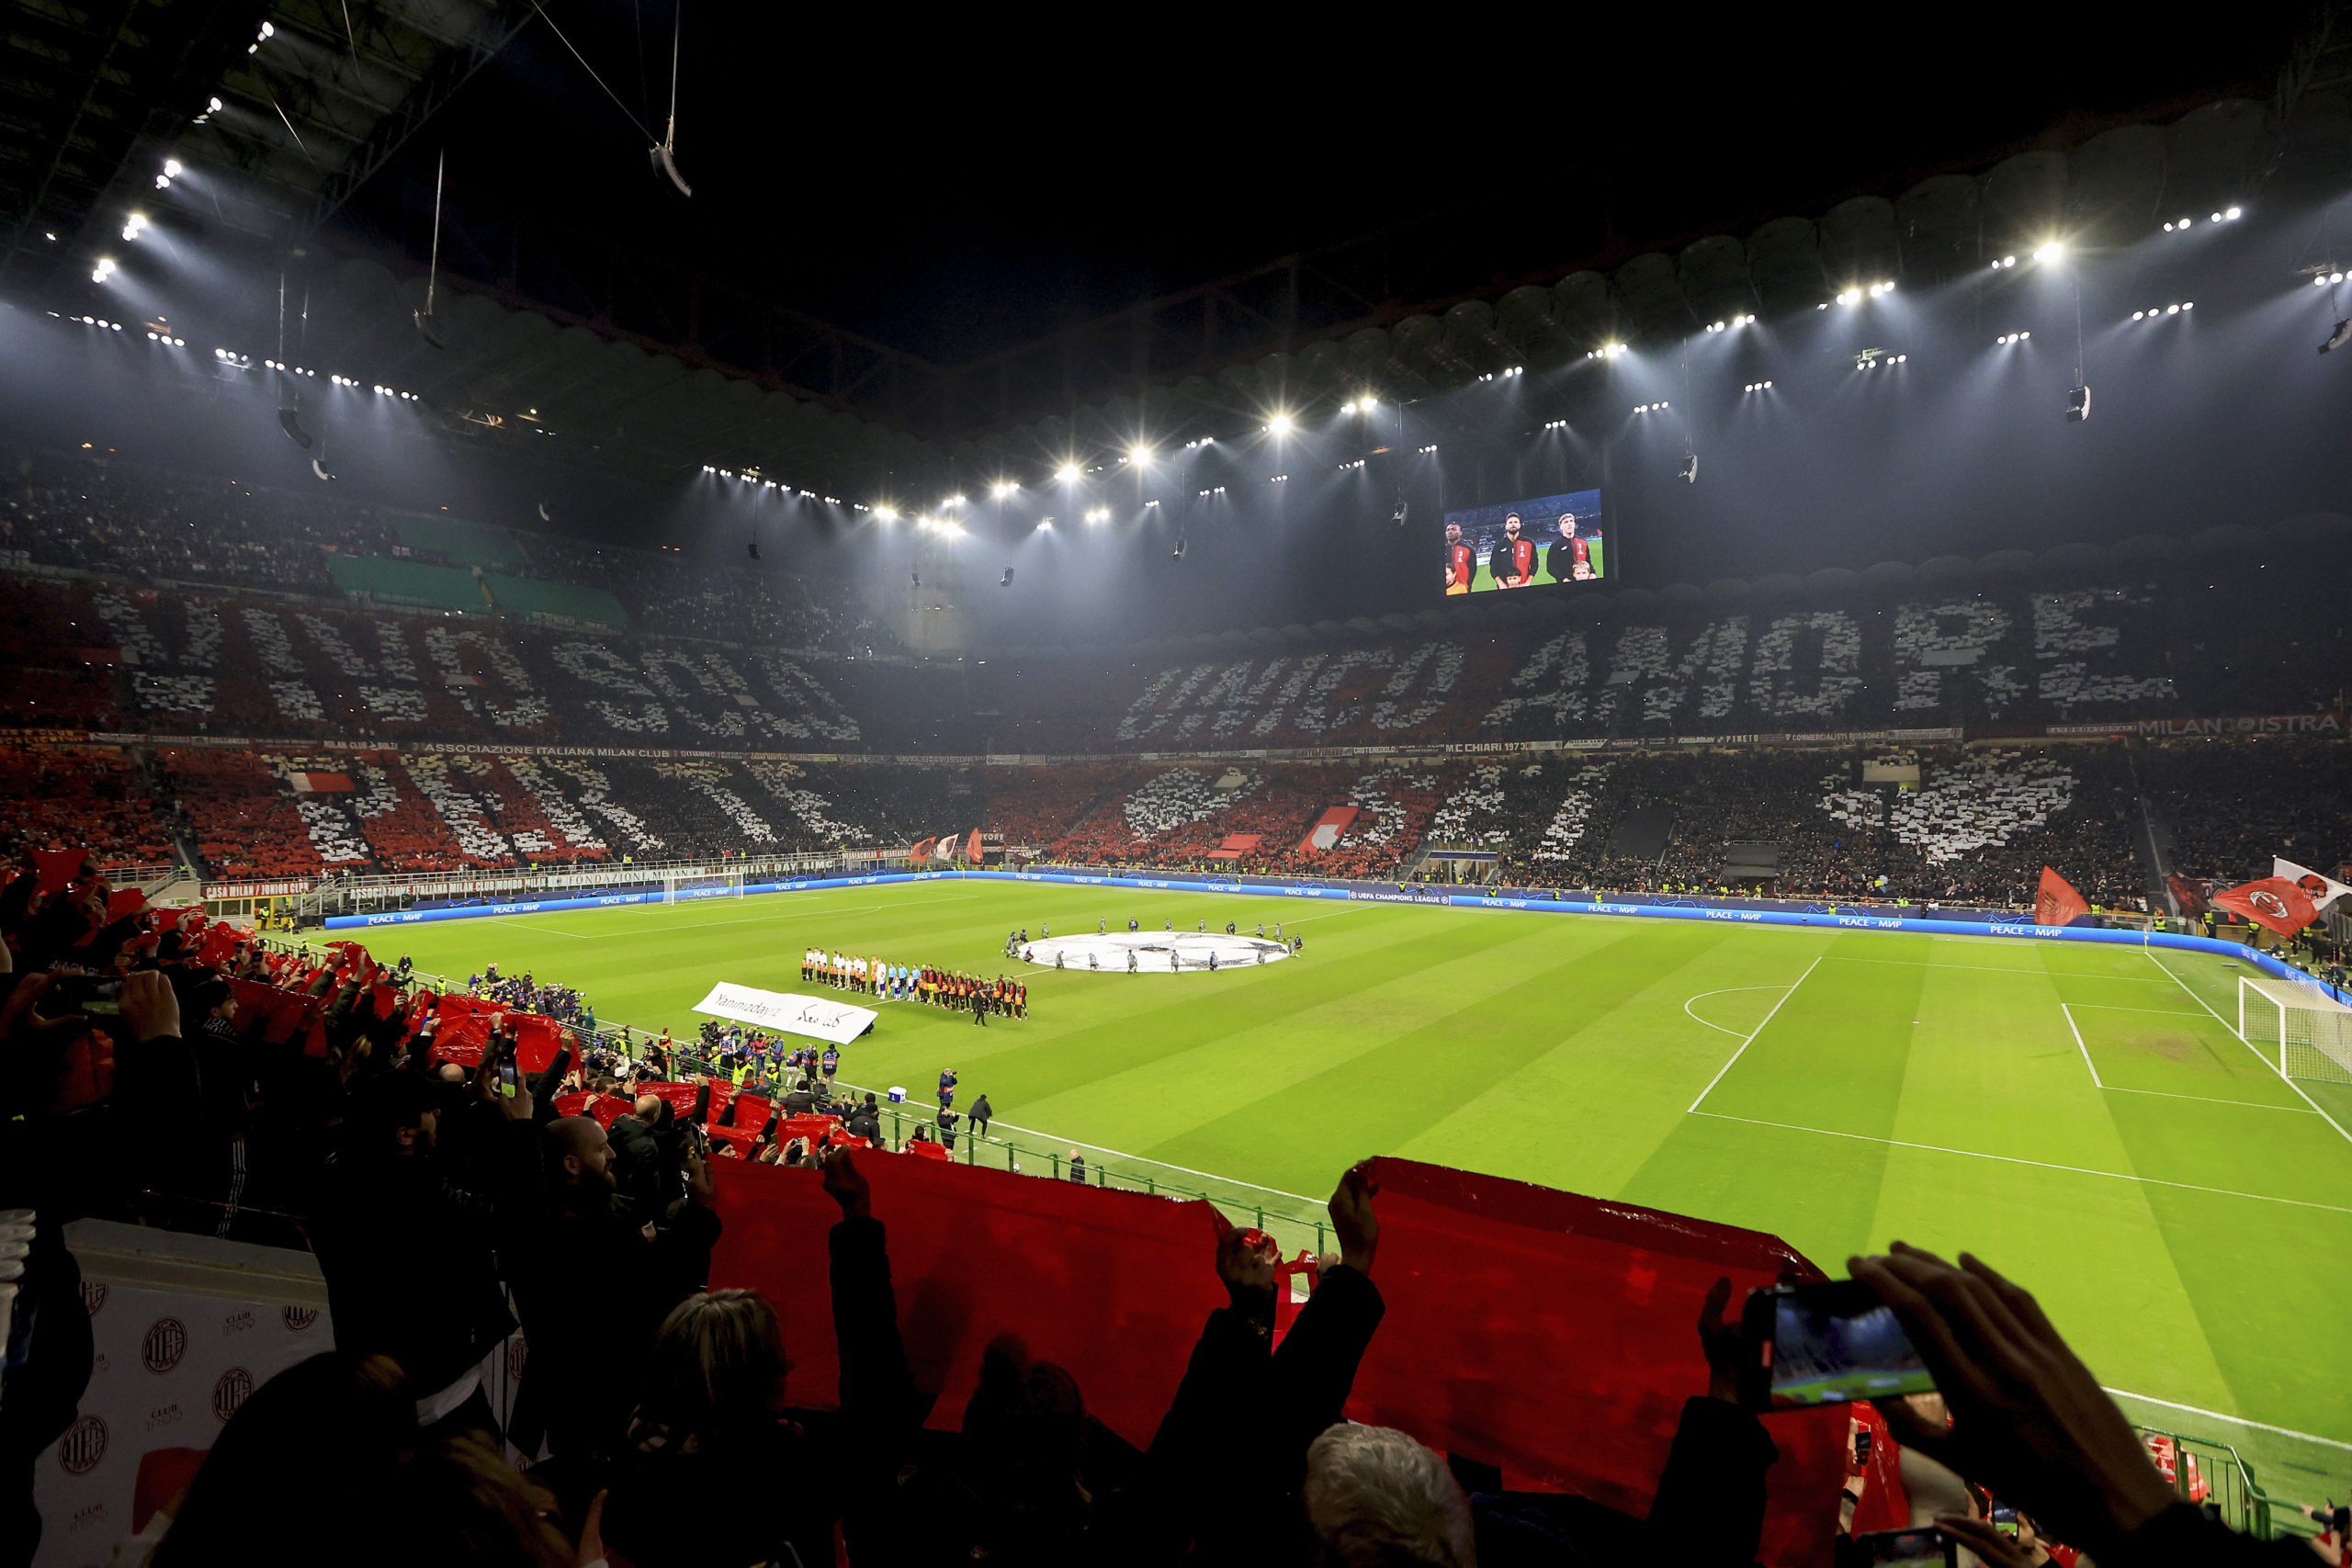 MILAN, ITALY - FEBRUARY 14: General view of Stadio Giuseppe Meazza San Siro prior to the UEFA Champions League round of 16 leg one match between AC Milan and Tottenham Hotspur at Giuseppe Meazza Stadium on February 14, 2023 in Milan, Italy. (Photo by Giuseppe Cottini/AC Milan via Getty Images)